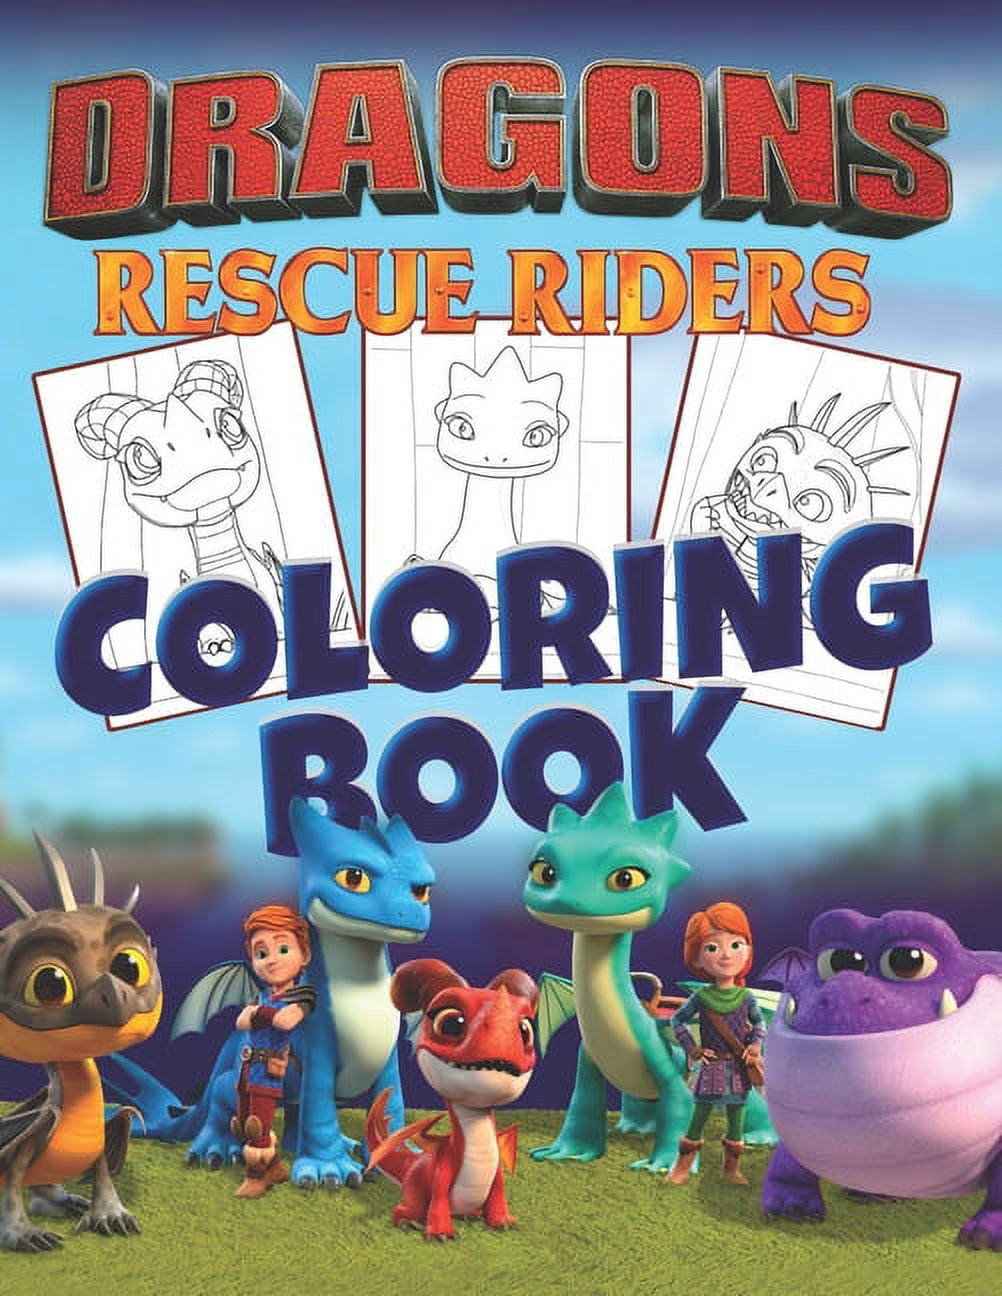 Dragons rescue riders coloring book illustrations for kids paperback